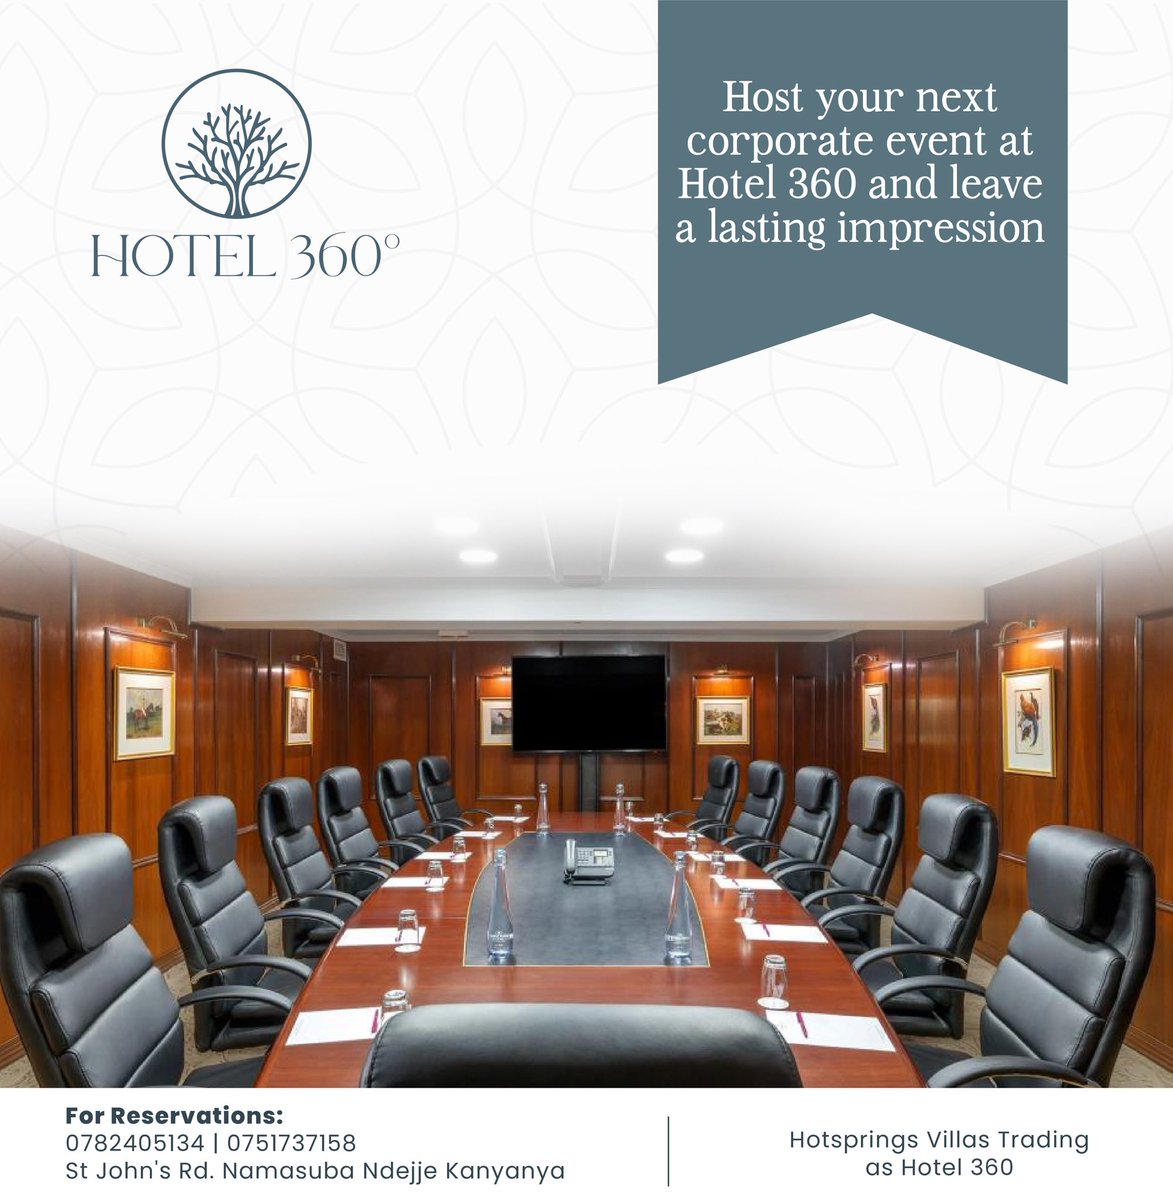 Our versatile event spaces are designed to accommodate gatherings of all sizes, from board meetings to company-wide conferences. Let us take care of the details while you focus on business   #BeyondTheStay #Hotel360